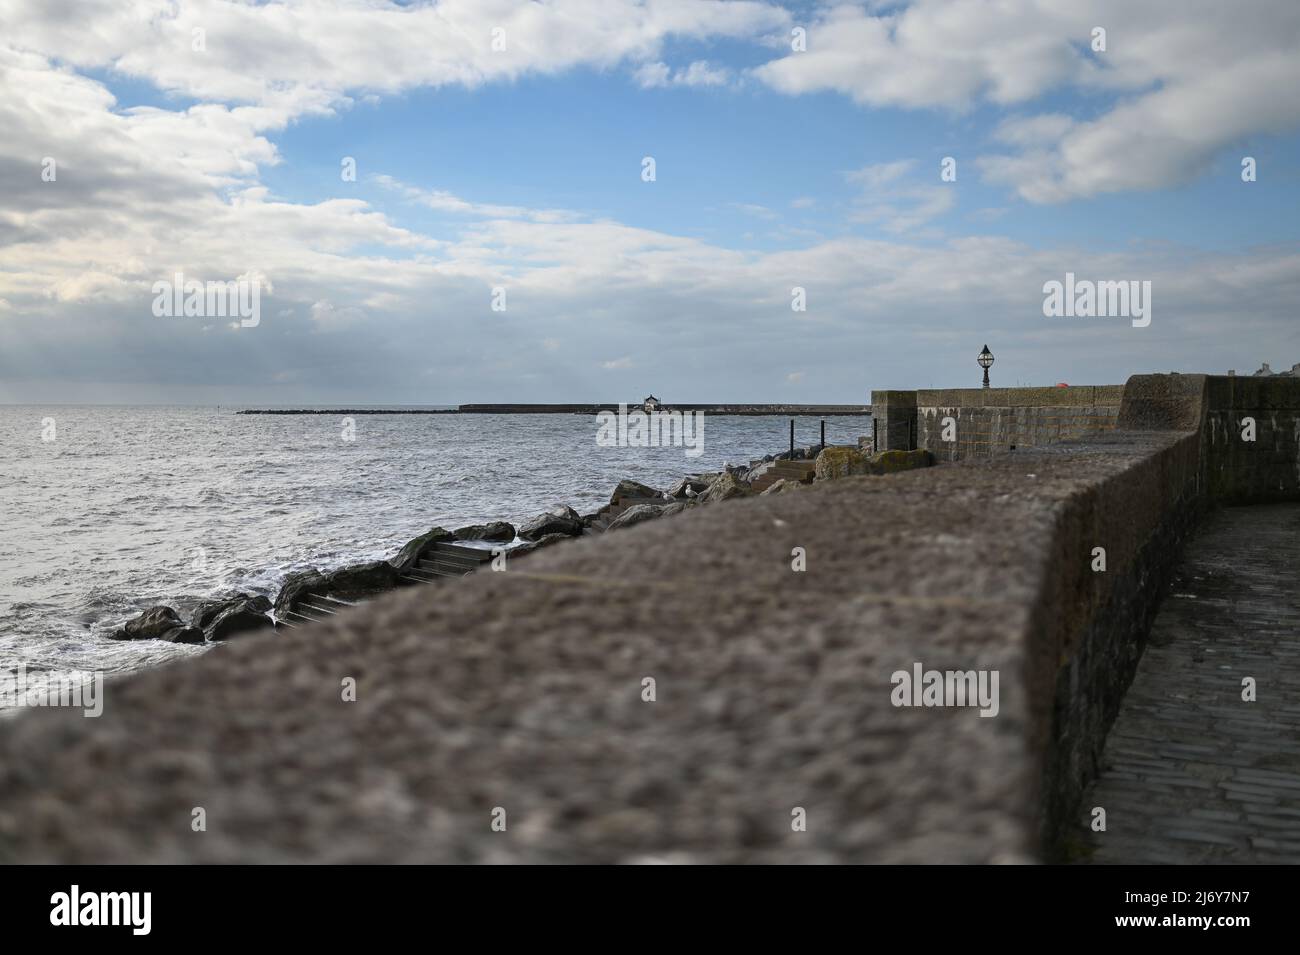 lyme Regis water front wall defence sea wall Stock Photo